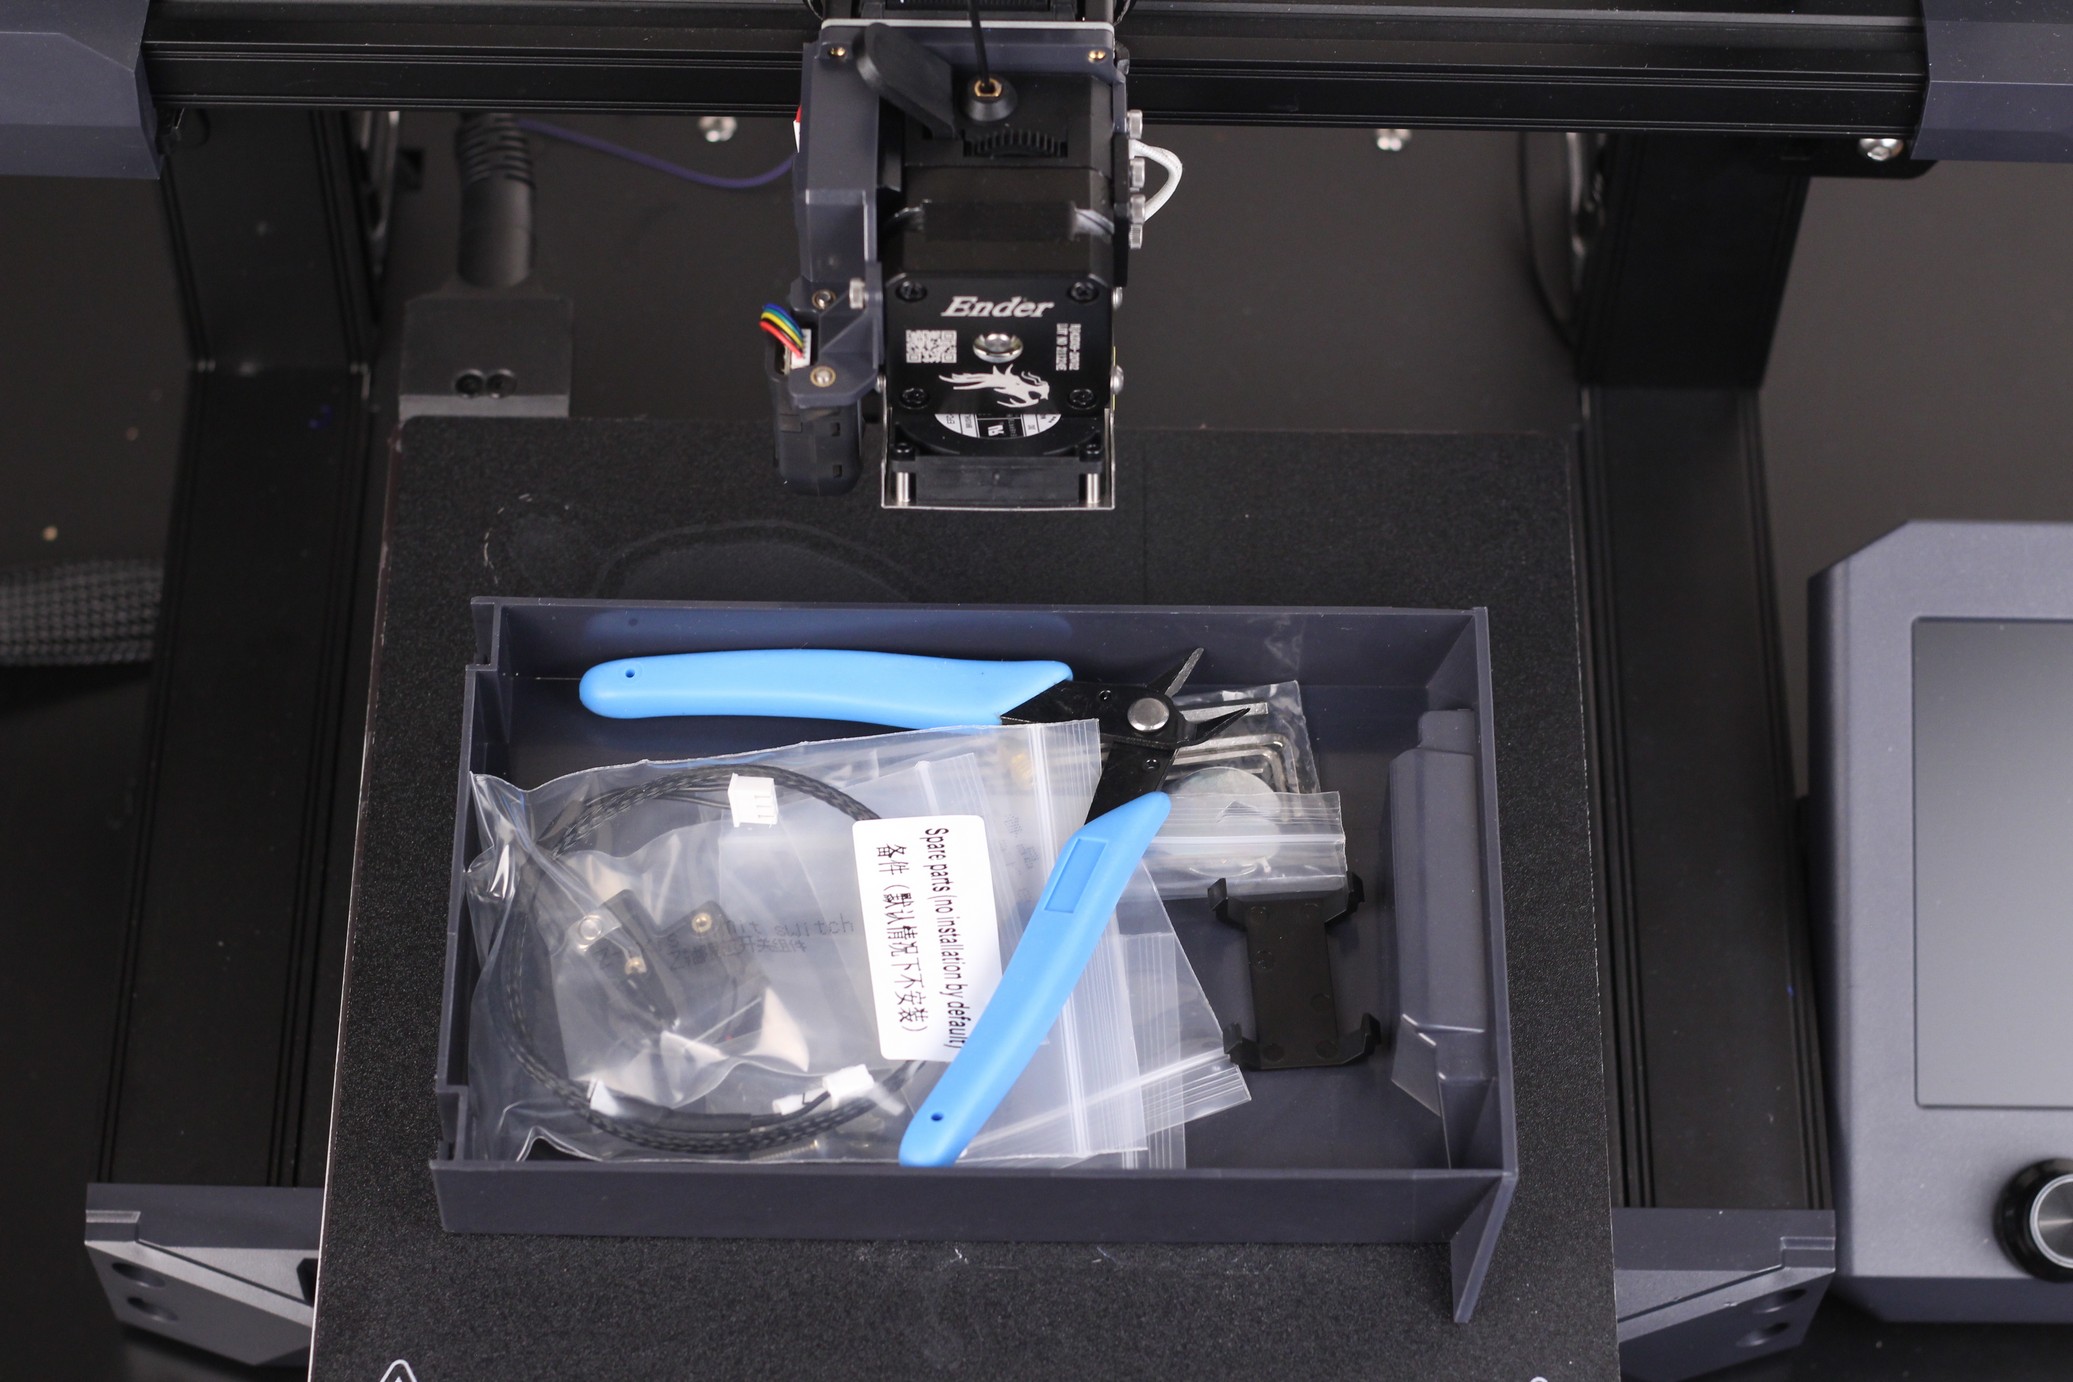 Ender 3 S1 Tool Drawer 2 | Creality Ender 3 S1 Review: Almost Perfect